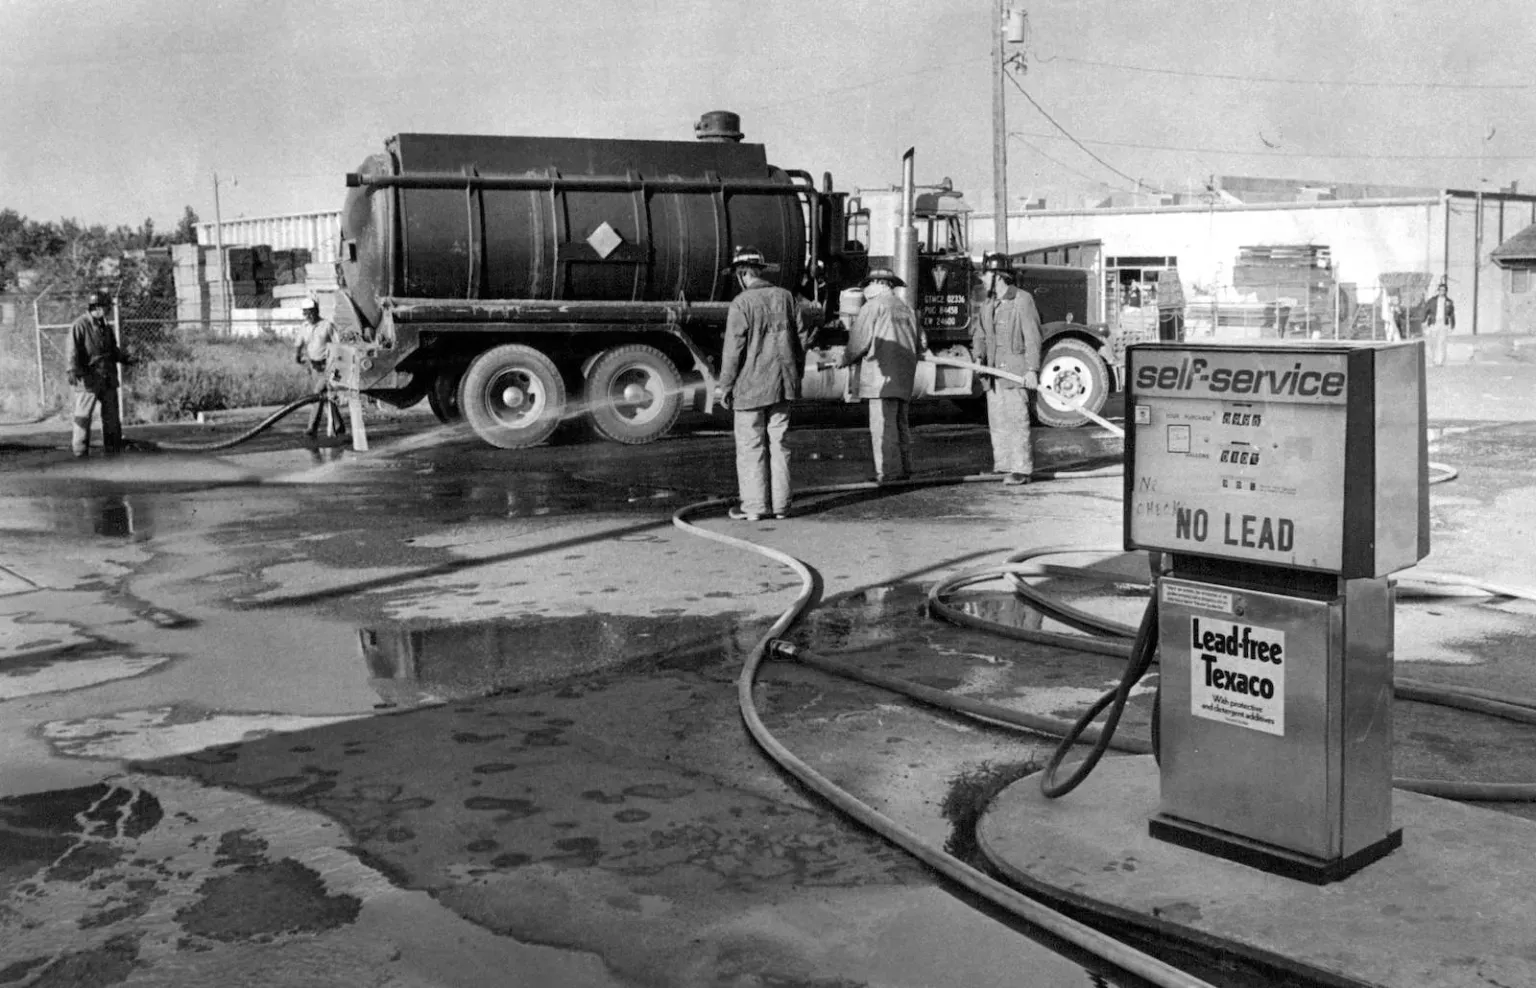 Firefighters spray liquid on a paved area near a large truck, with a gas pump in the foreground.